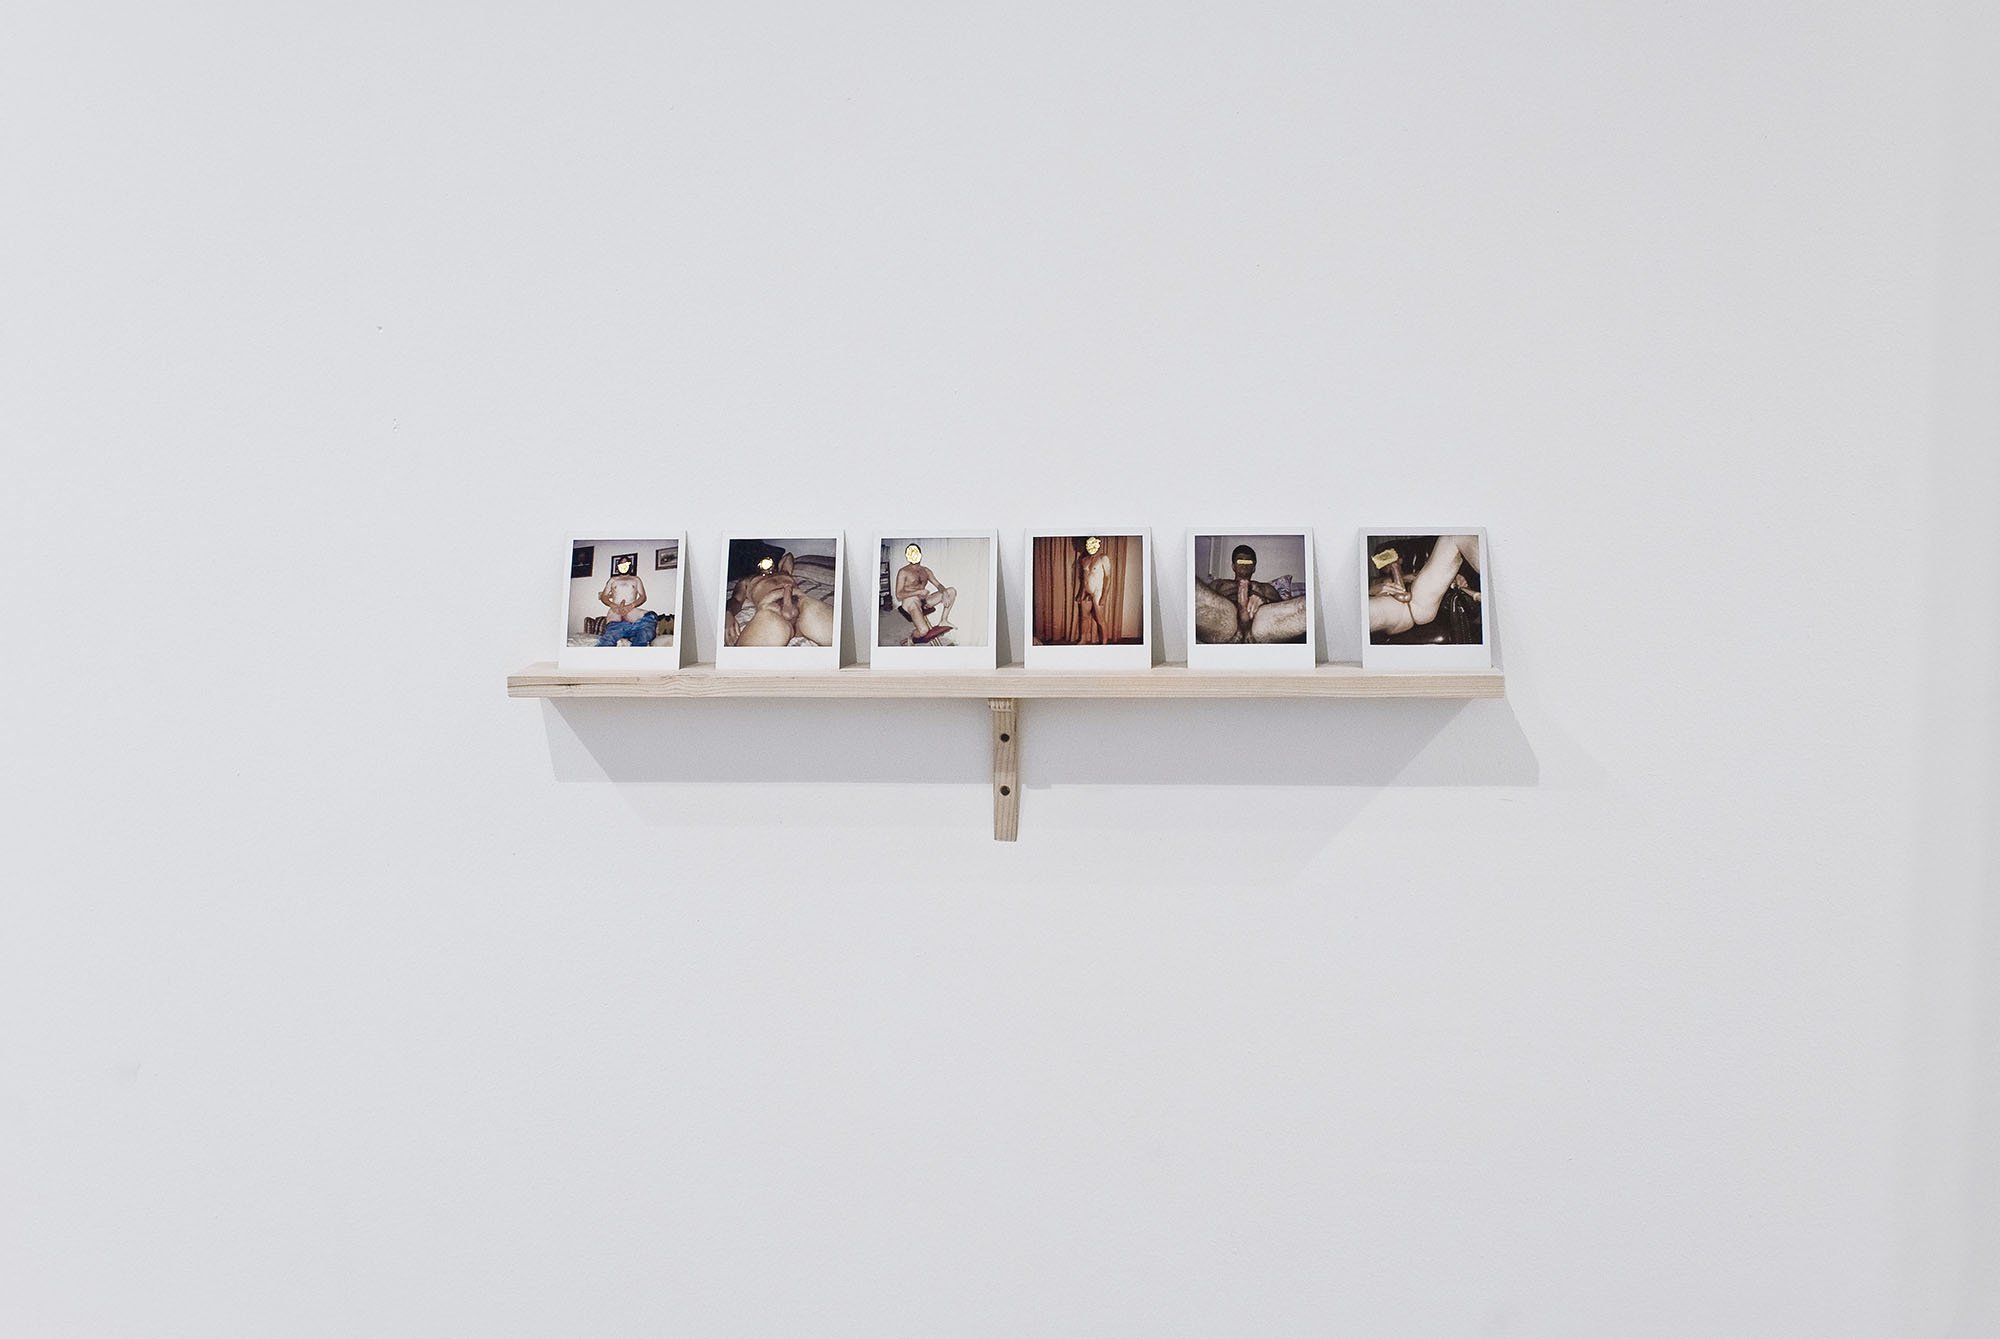 Steve Reinke, Untitled: The Flawed and the Fallen, six found polaroids with metal leaf on a shelf, 8.8 x 10.9 cm, 2004. Installation view, All That Shines Ain’t No Gold, Rodeo, Istanbul, 2012